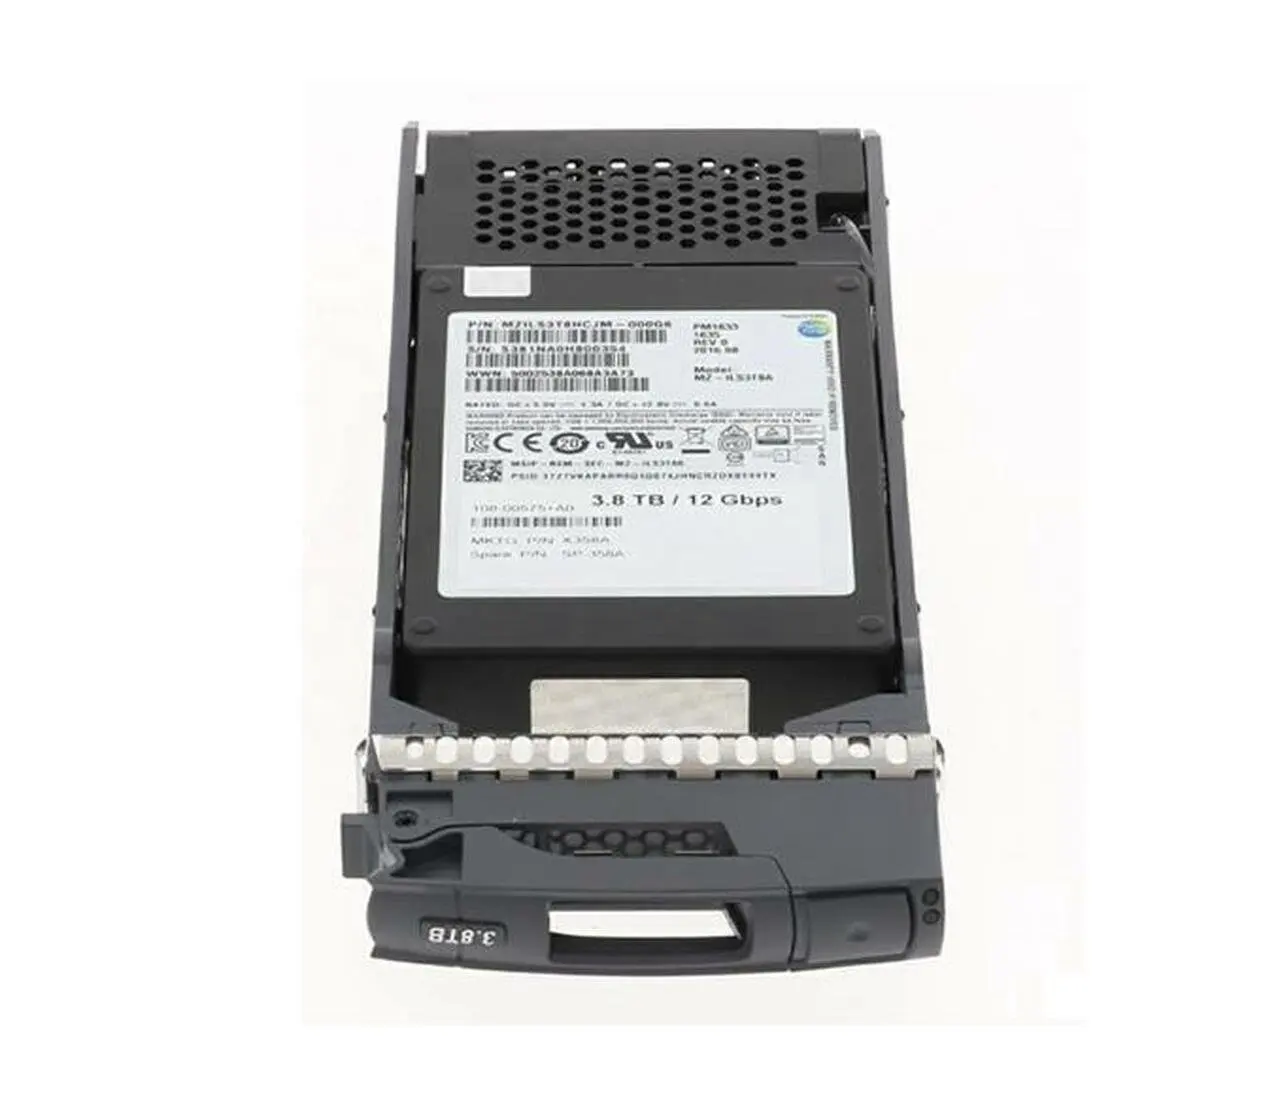 hdd ssd Netapp X357a X357A-R6 X358A X358A-R6 3.8TB 2.5IN 12Gbps SAS SED SSD For Fas224c